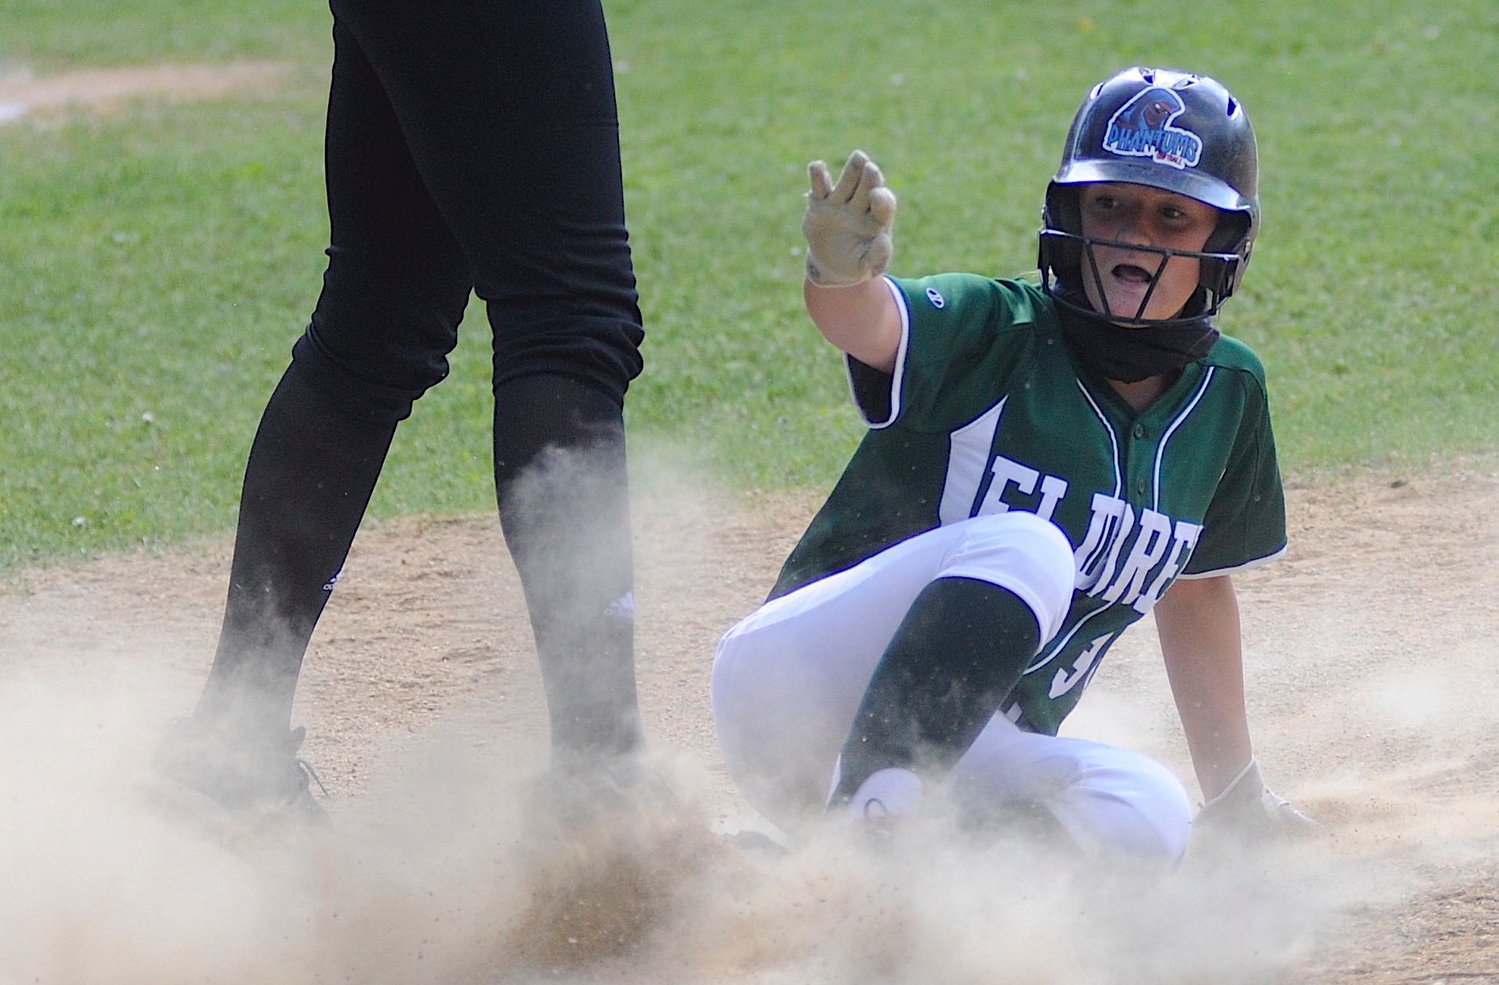 Dust devil. Eldred’s ace pitcher Dana Donnelly makes it safely back to first on Sullivan West’s Taylor Wall. See the special coverage of Donnelly, who on May 14, posted a perfect game against Seward.